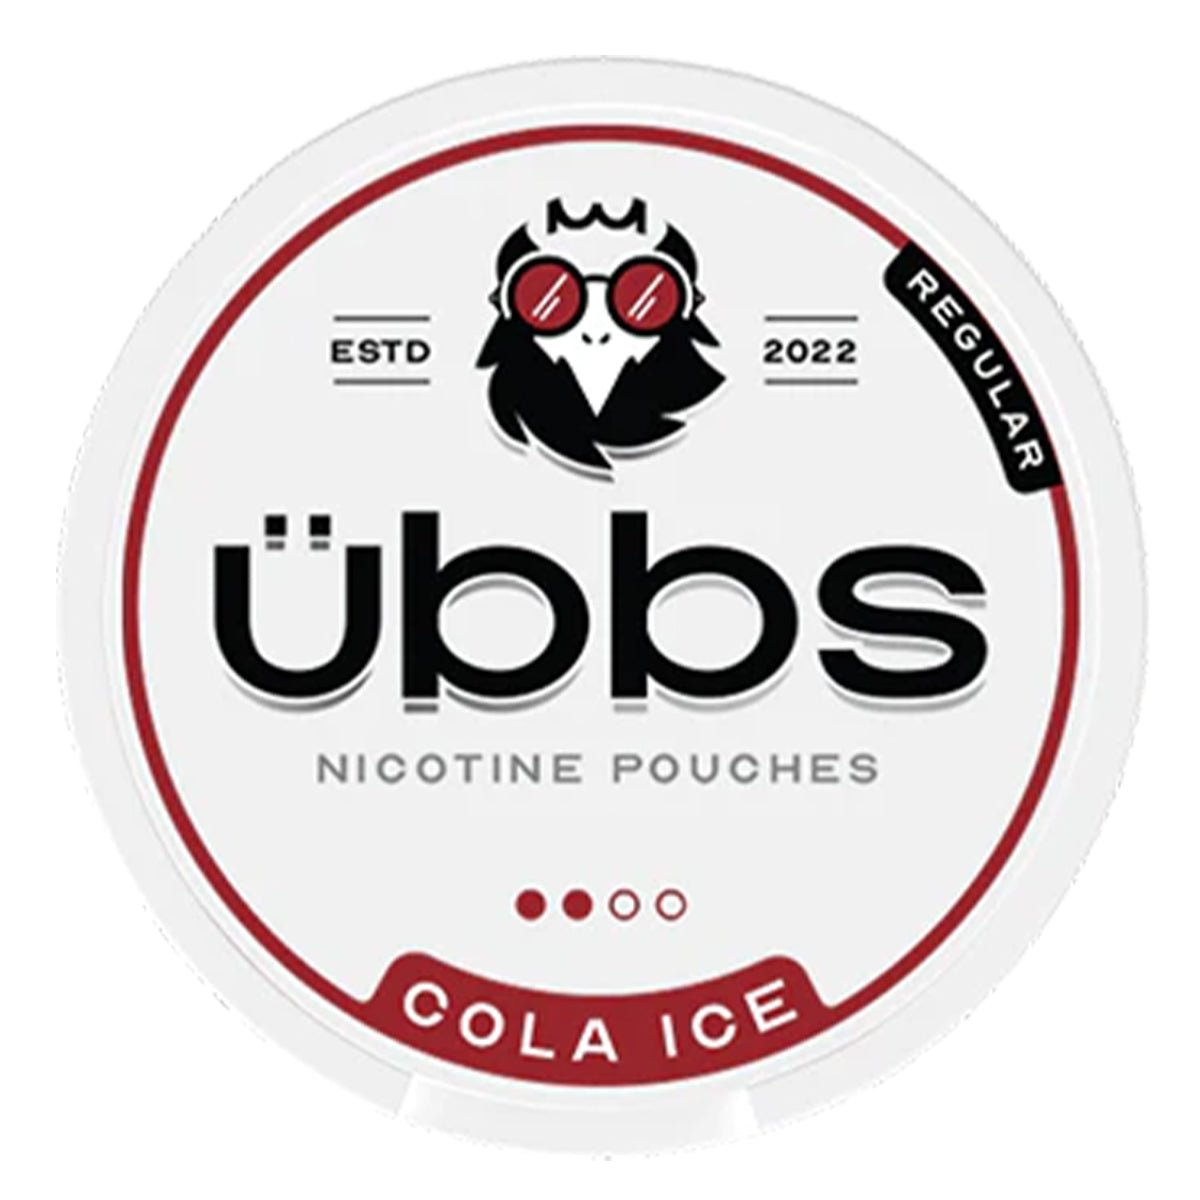 Cola Ice Nicotine Pouches By Ubbs - Prime Vapes UK